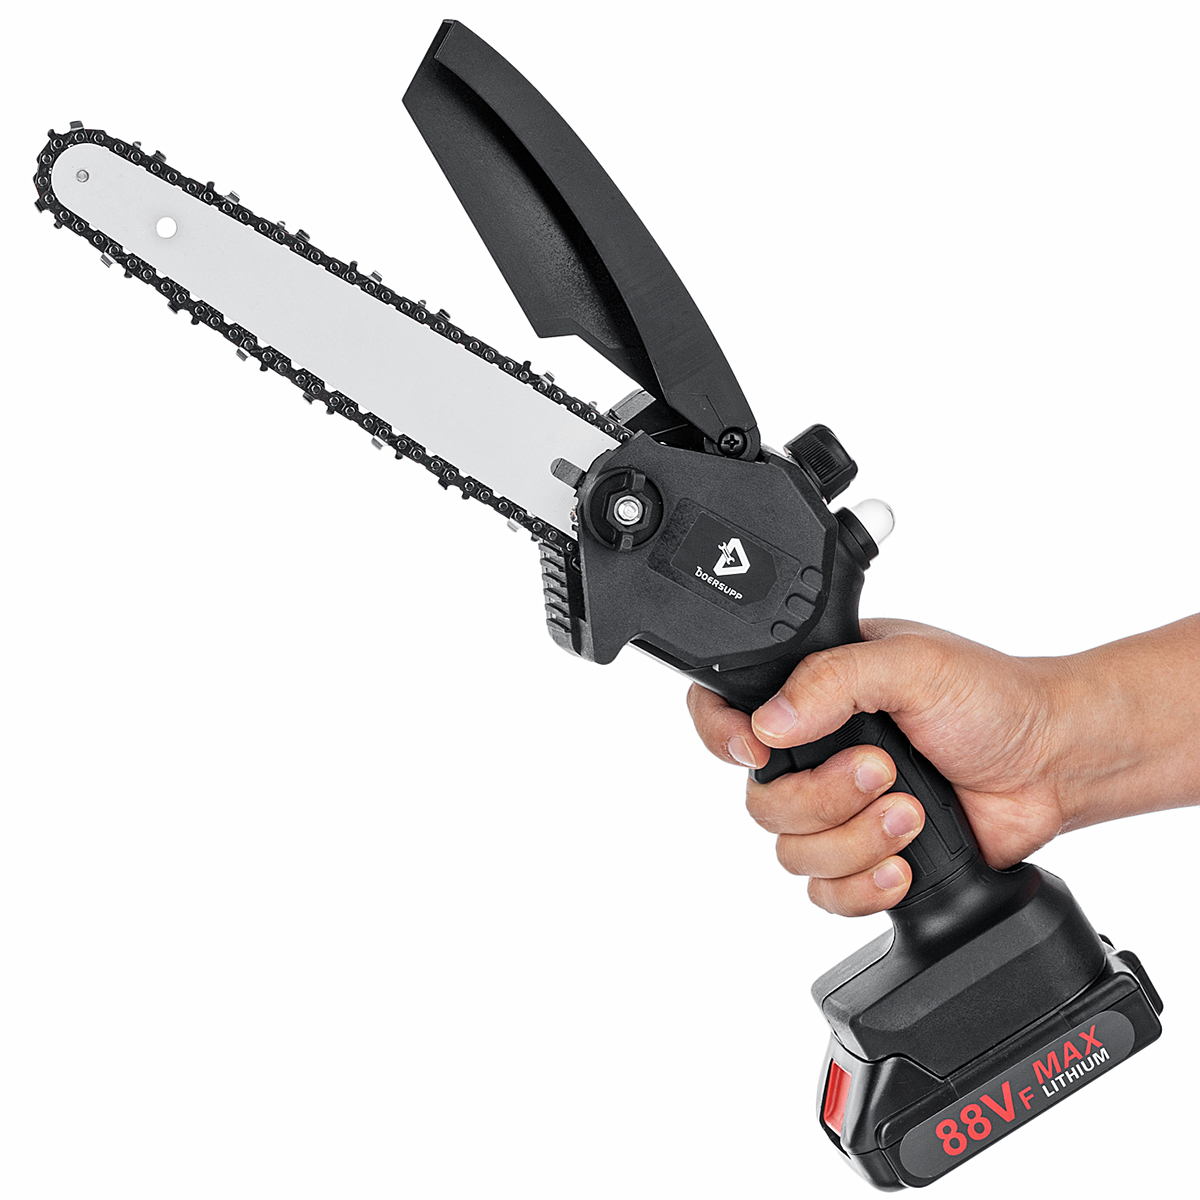 Doersupp-88VF-8-Inch-Portable-Electric-Saw-Pruning-Chain-Saws-3000W-5MS-Rechargeable-Woodworking-Pow-1915311-14